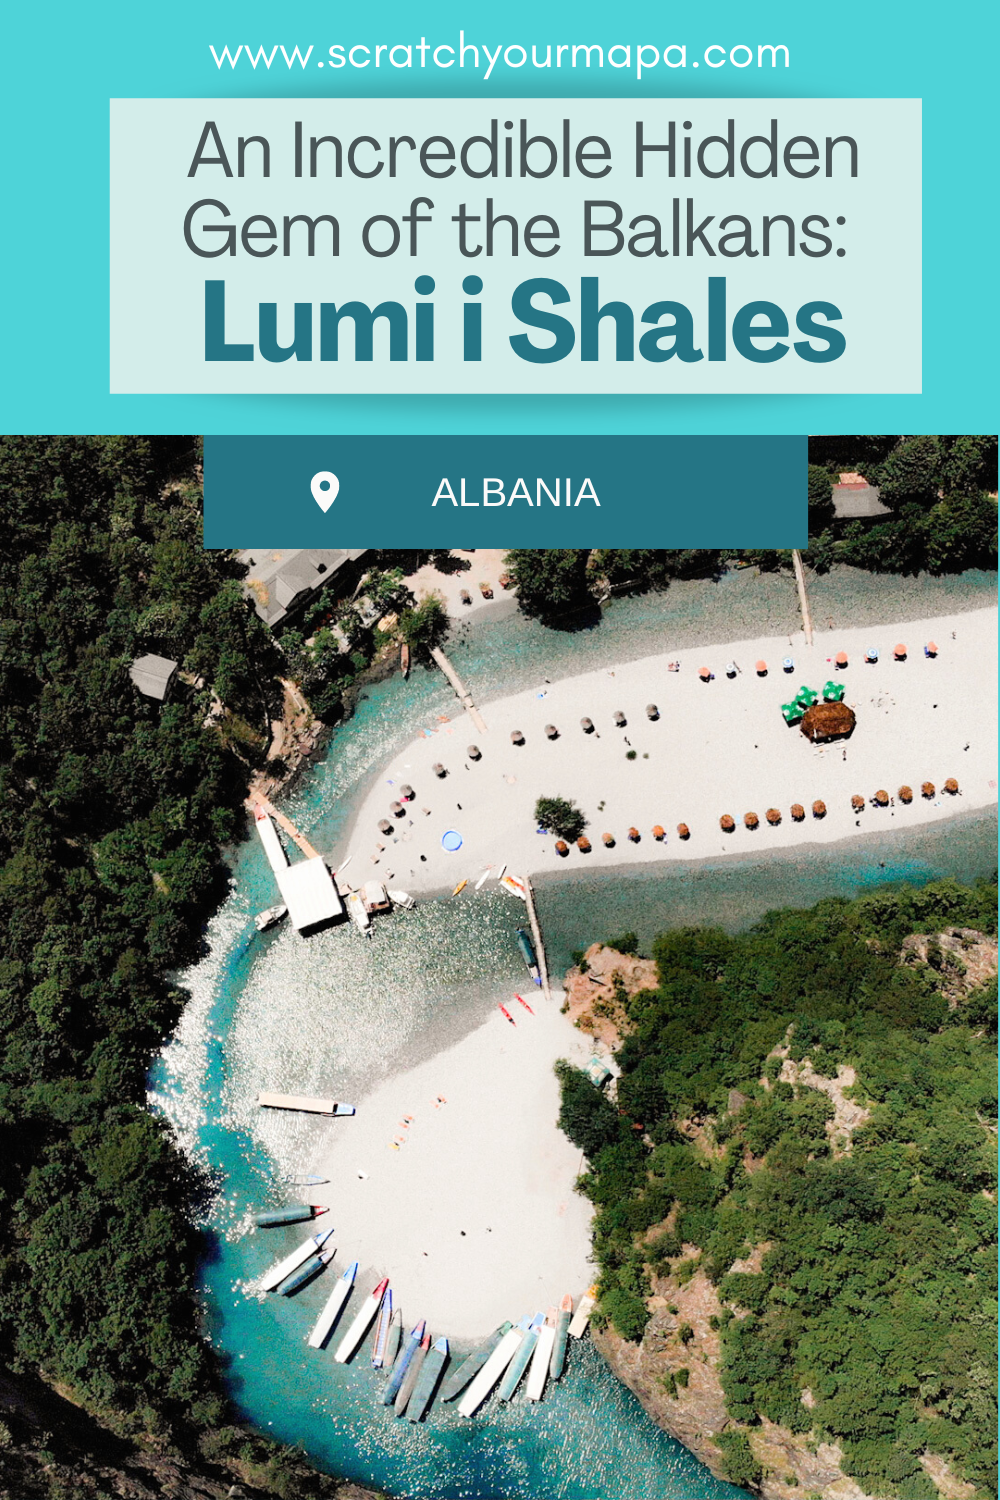  Lumi i Shales Pin, an incredible place in Albania